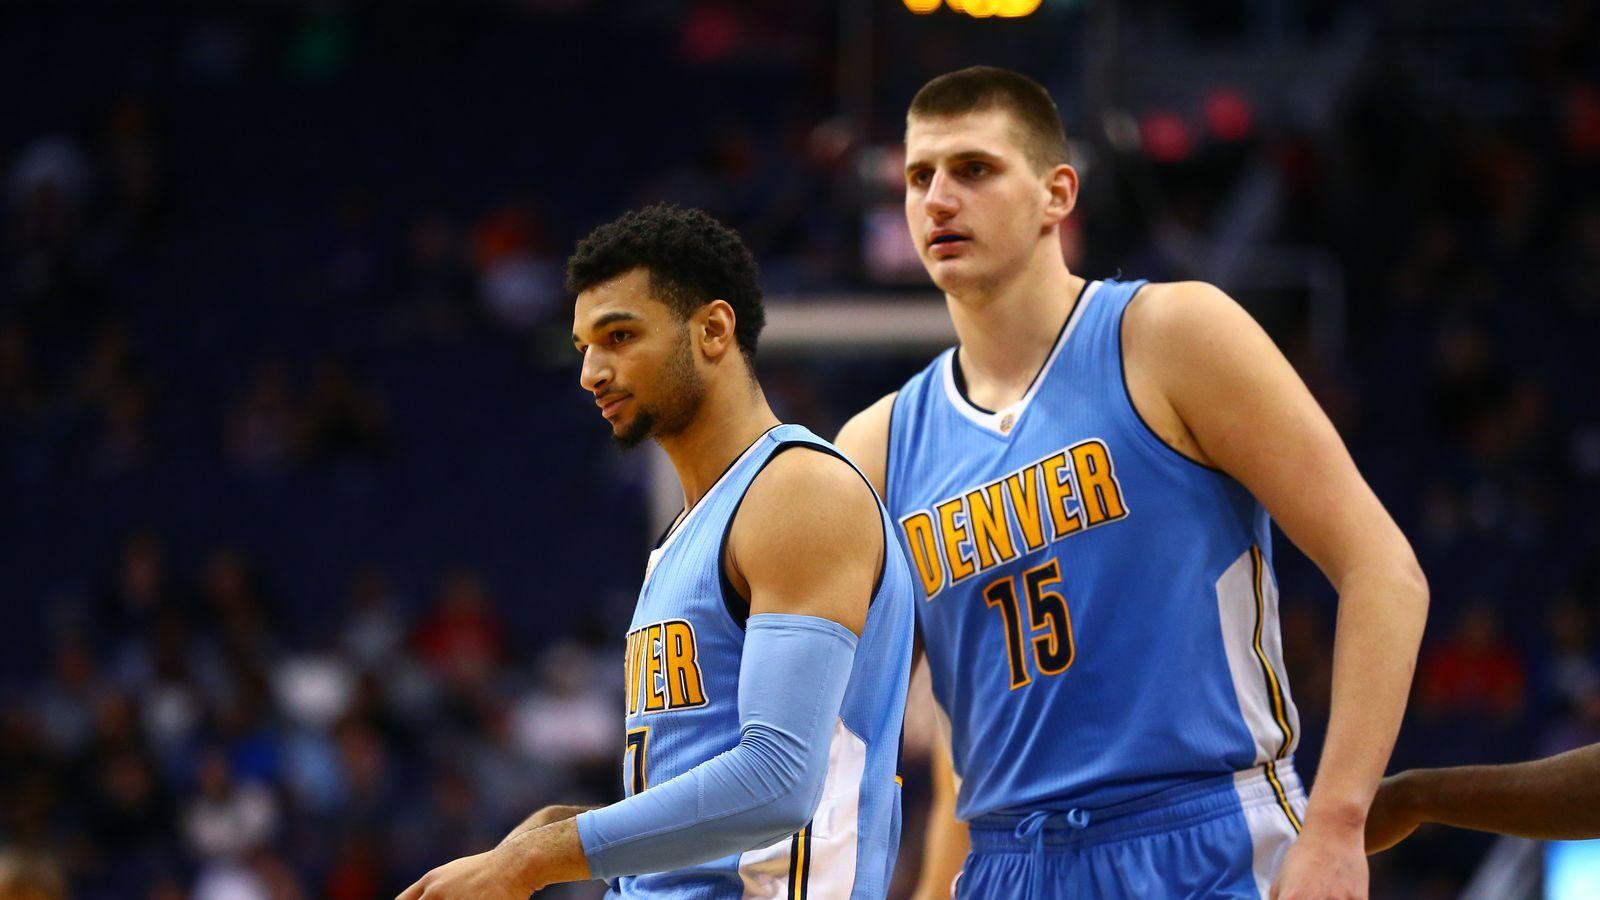 Are Nikola Jokic and Jamal Murray really worth being excited